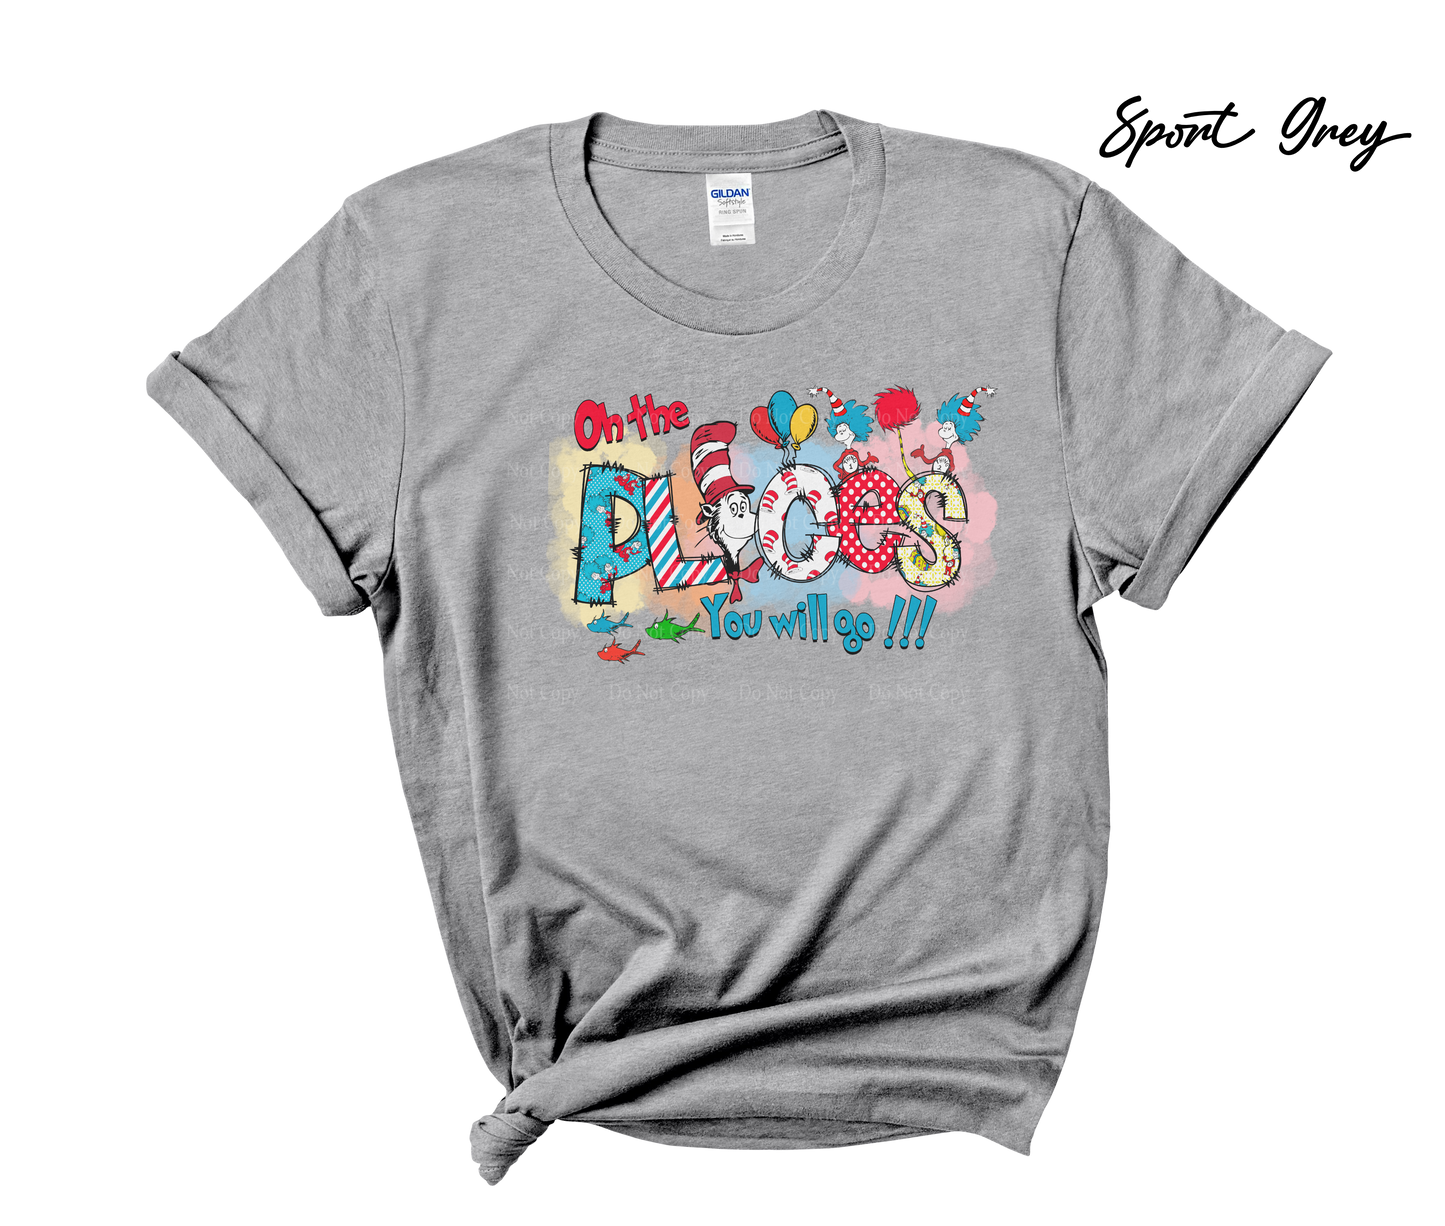 Oh the places you'll go watercolor - Cat in the Hat T-Shirt